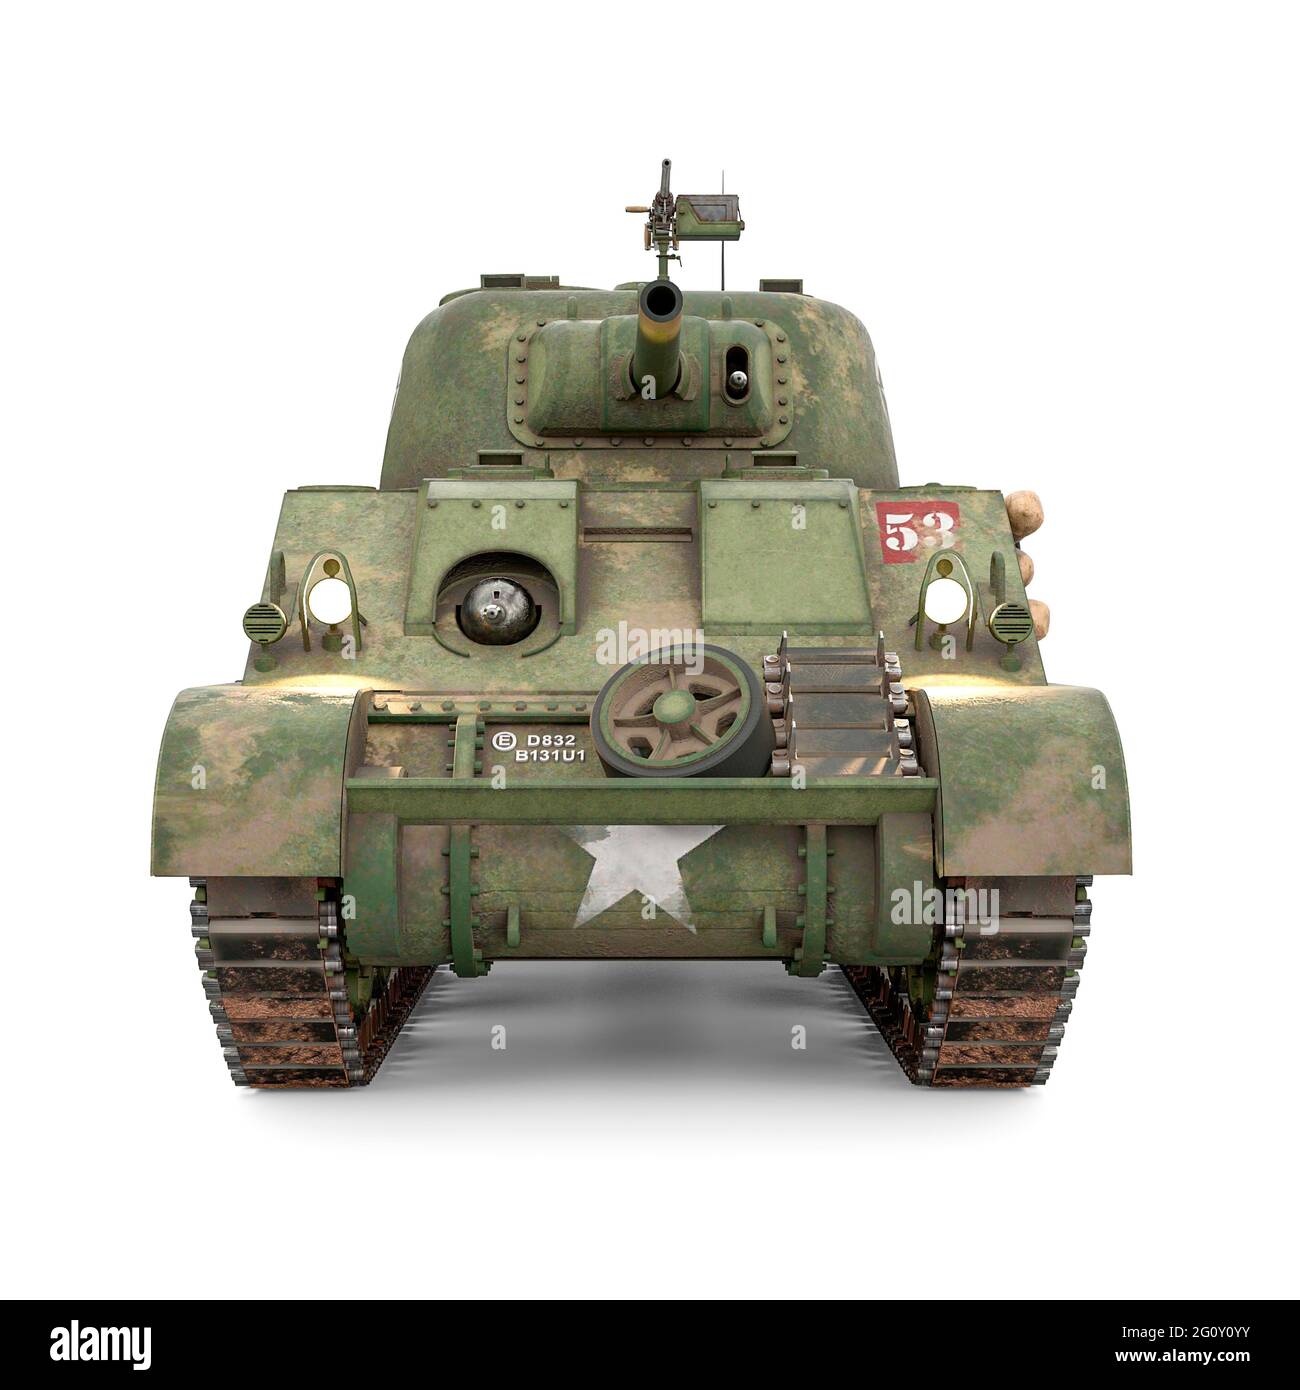 us army tank front view, 3d illustration Stock Photo - Alamy